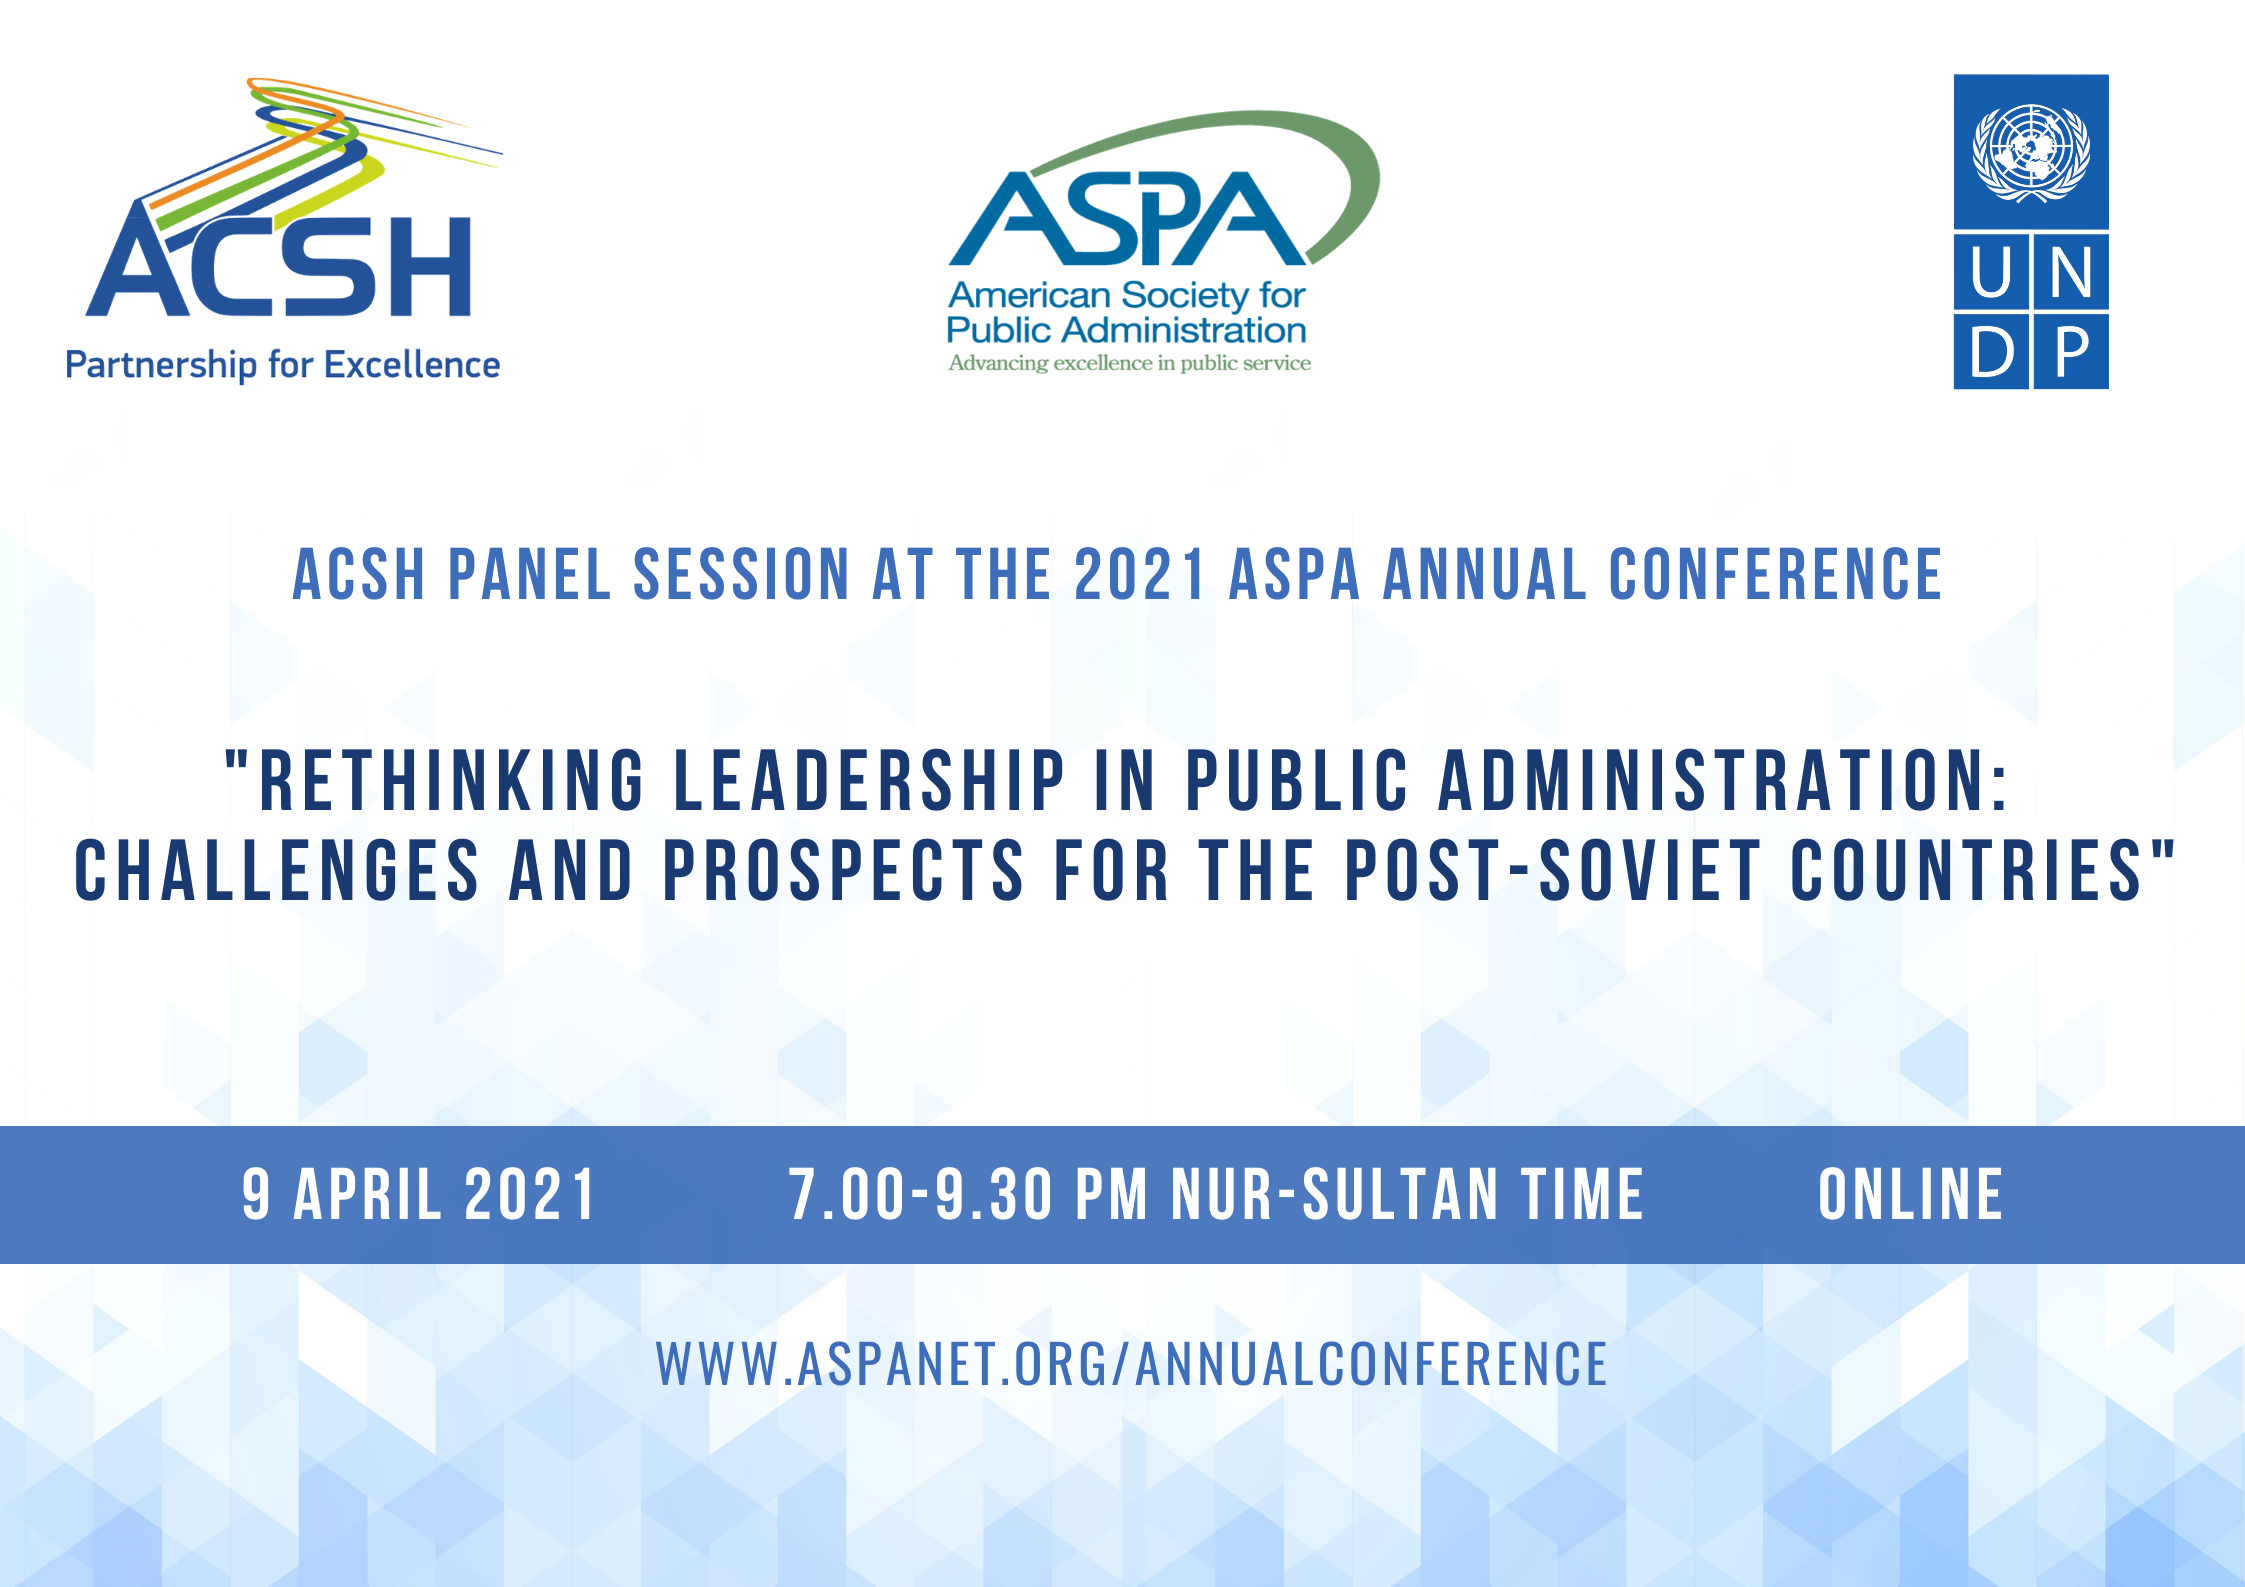 ACSH Panel session “Rethinking Leadership in Public Administration: Challenges and Prospects for the Post-Soviet Countries”